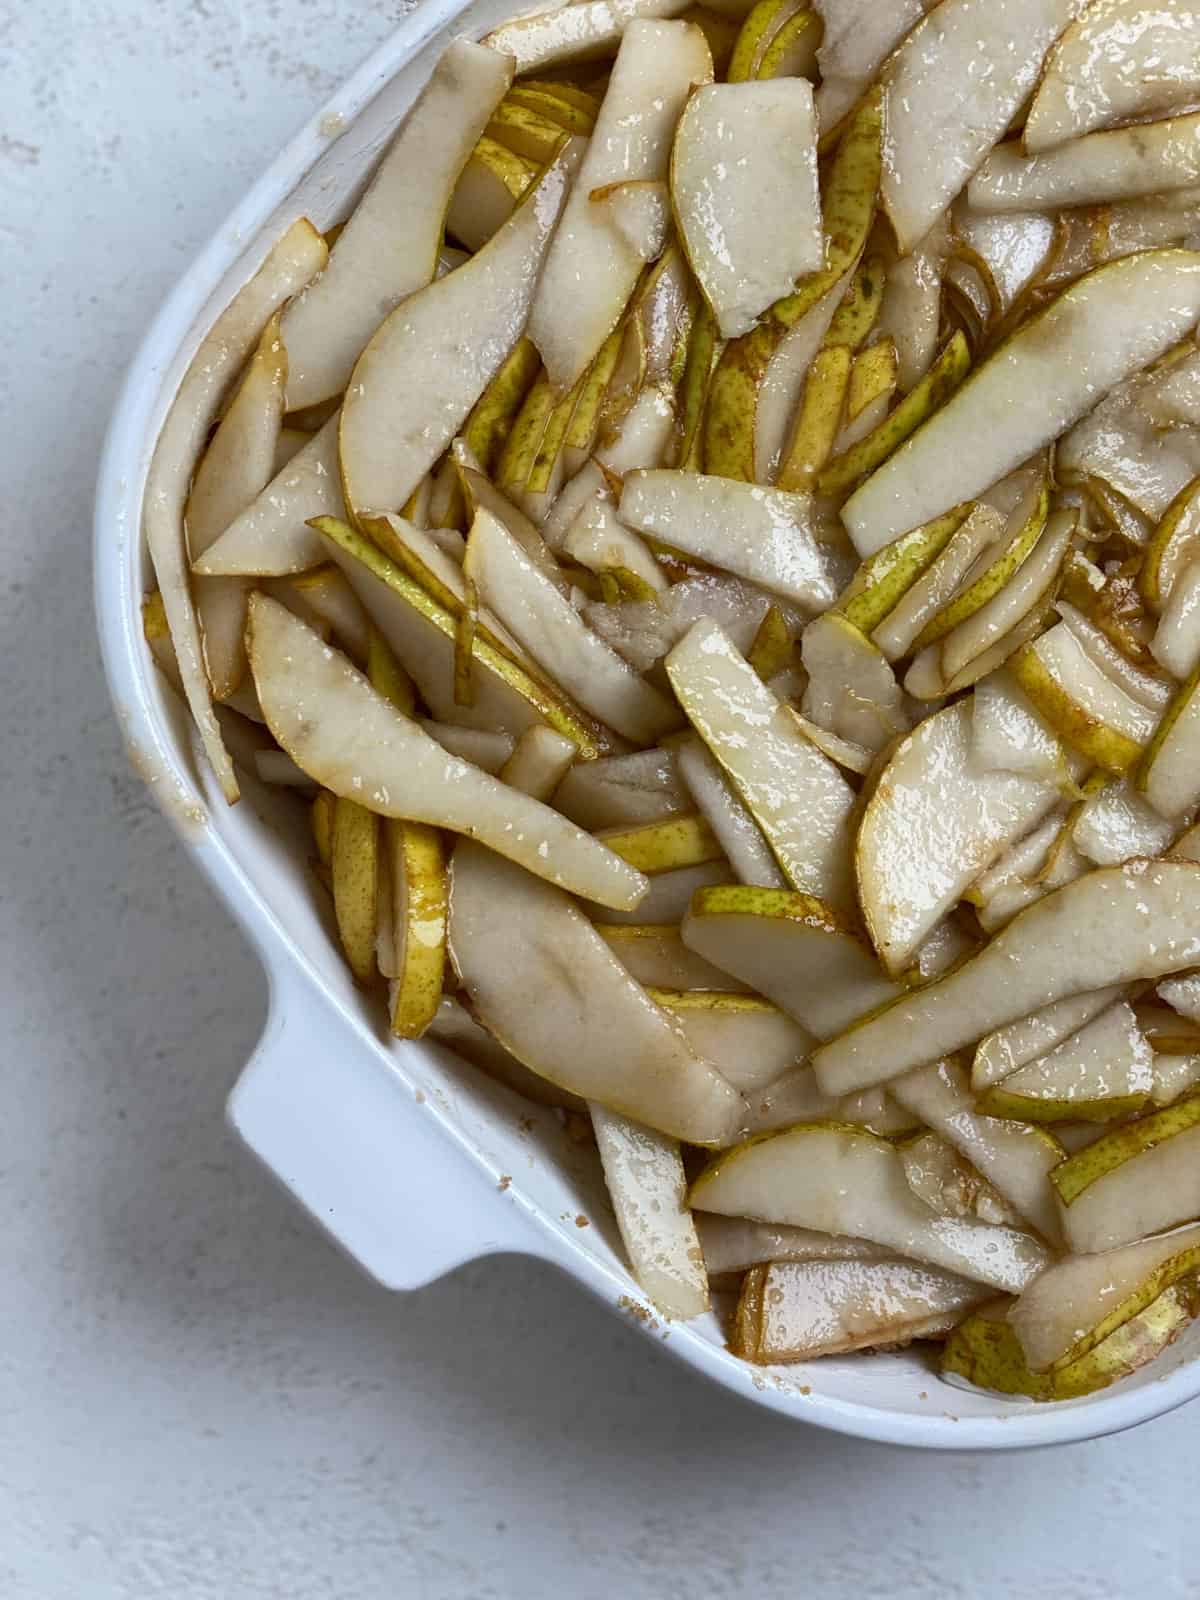 process shot showing sliced pears and brown sugar mixed together in baking dish